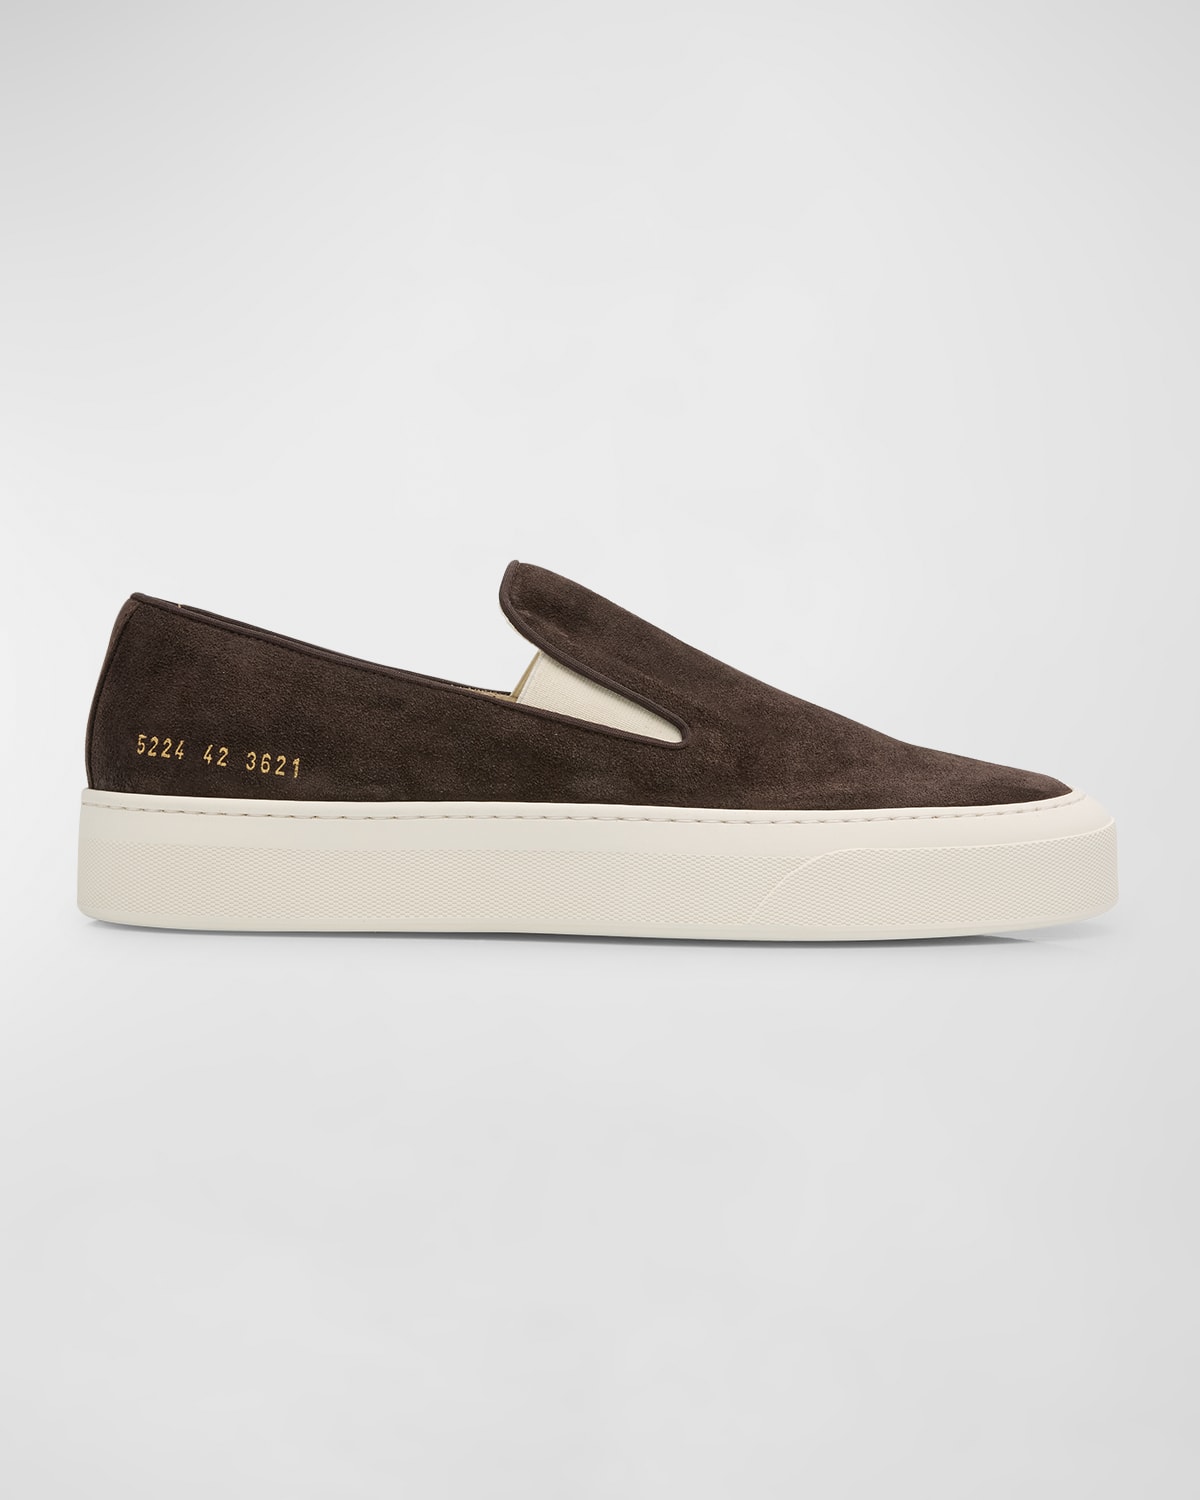 Shop Common Projects Men's Suede Slip-on Sneakers In 3621 - Brown